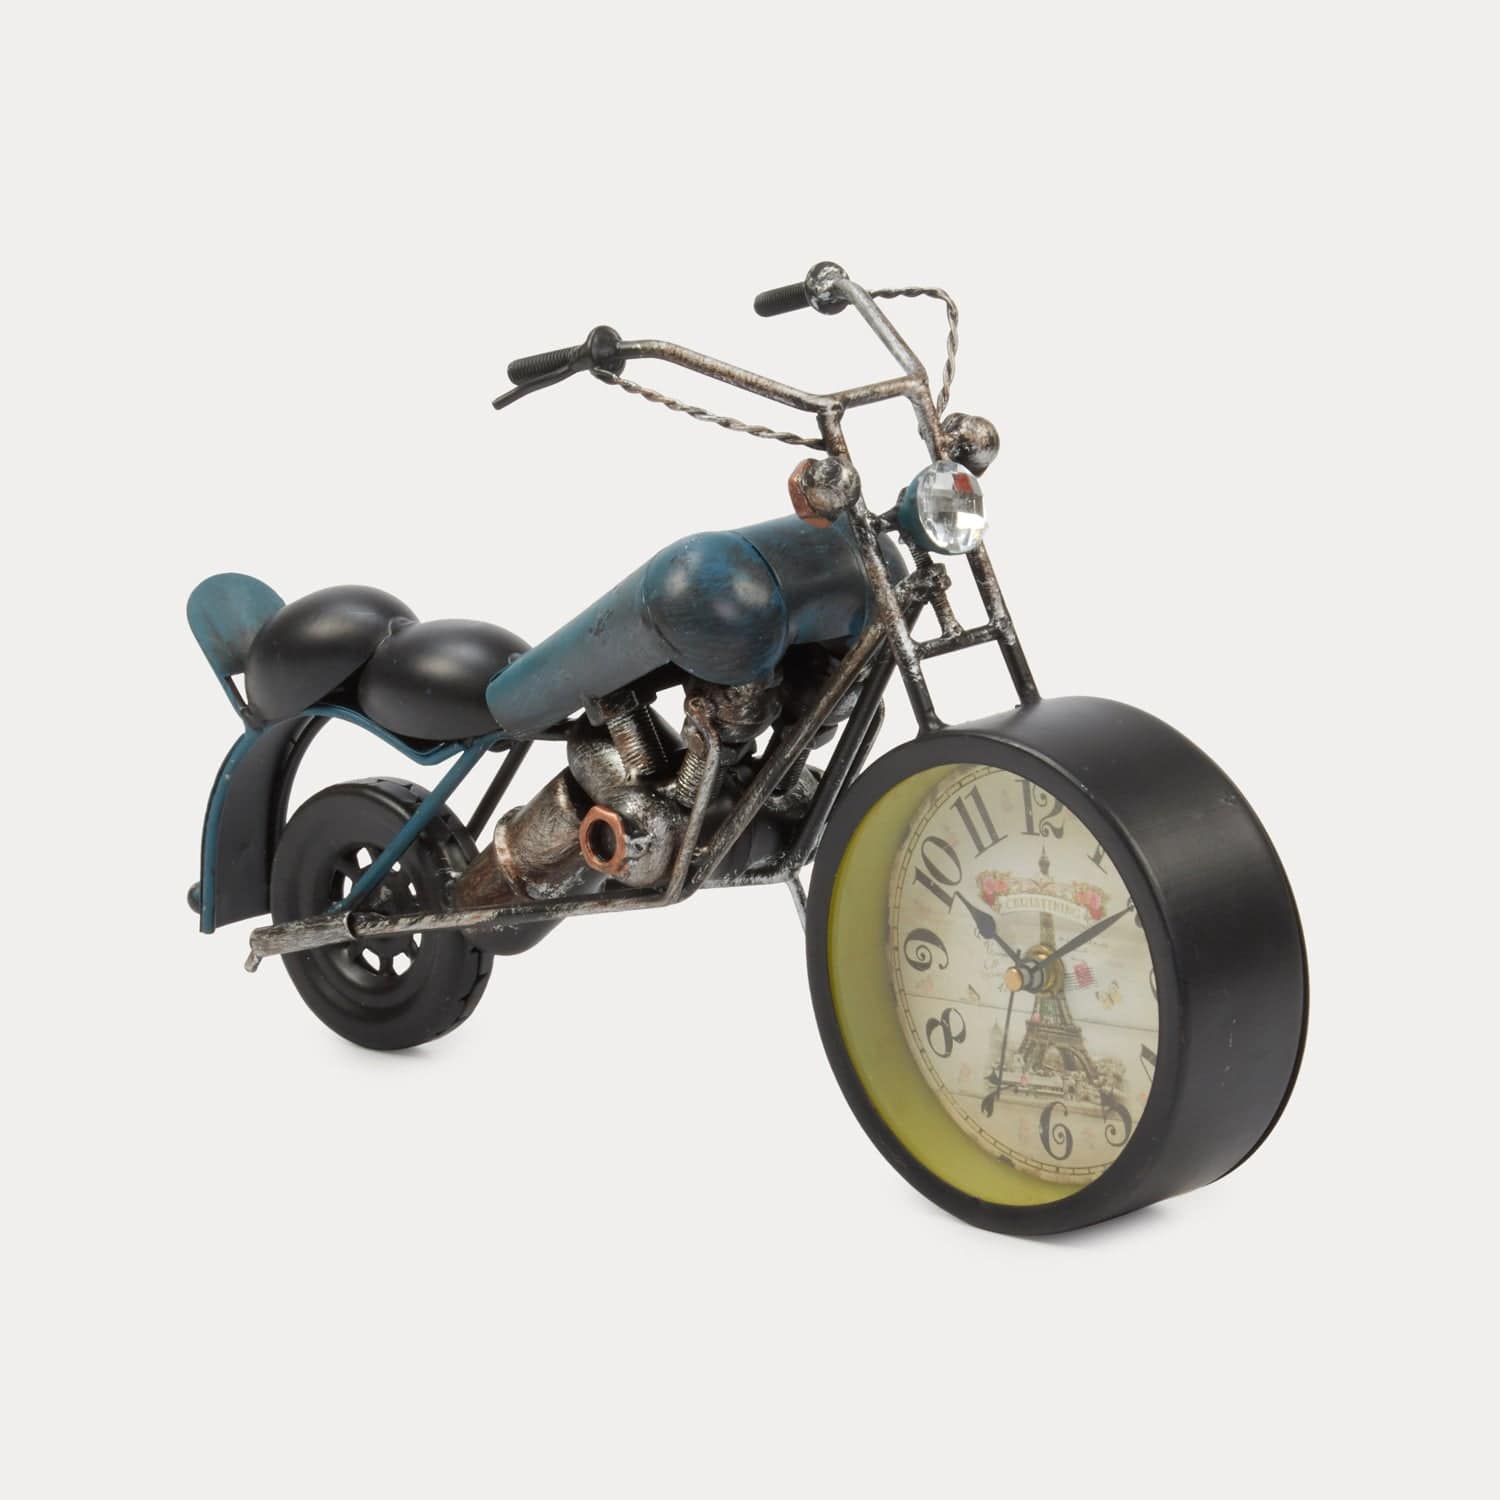 Red Butler Clock Bike Clock DTBC00M13Y19A2 TBC13A2 Metal Bike Clock – Unique Table Clock for Bike Lovers Redbutler